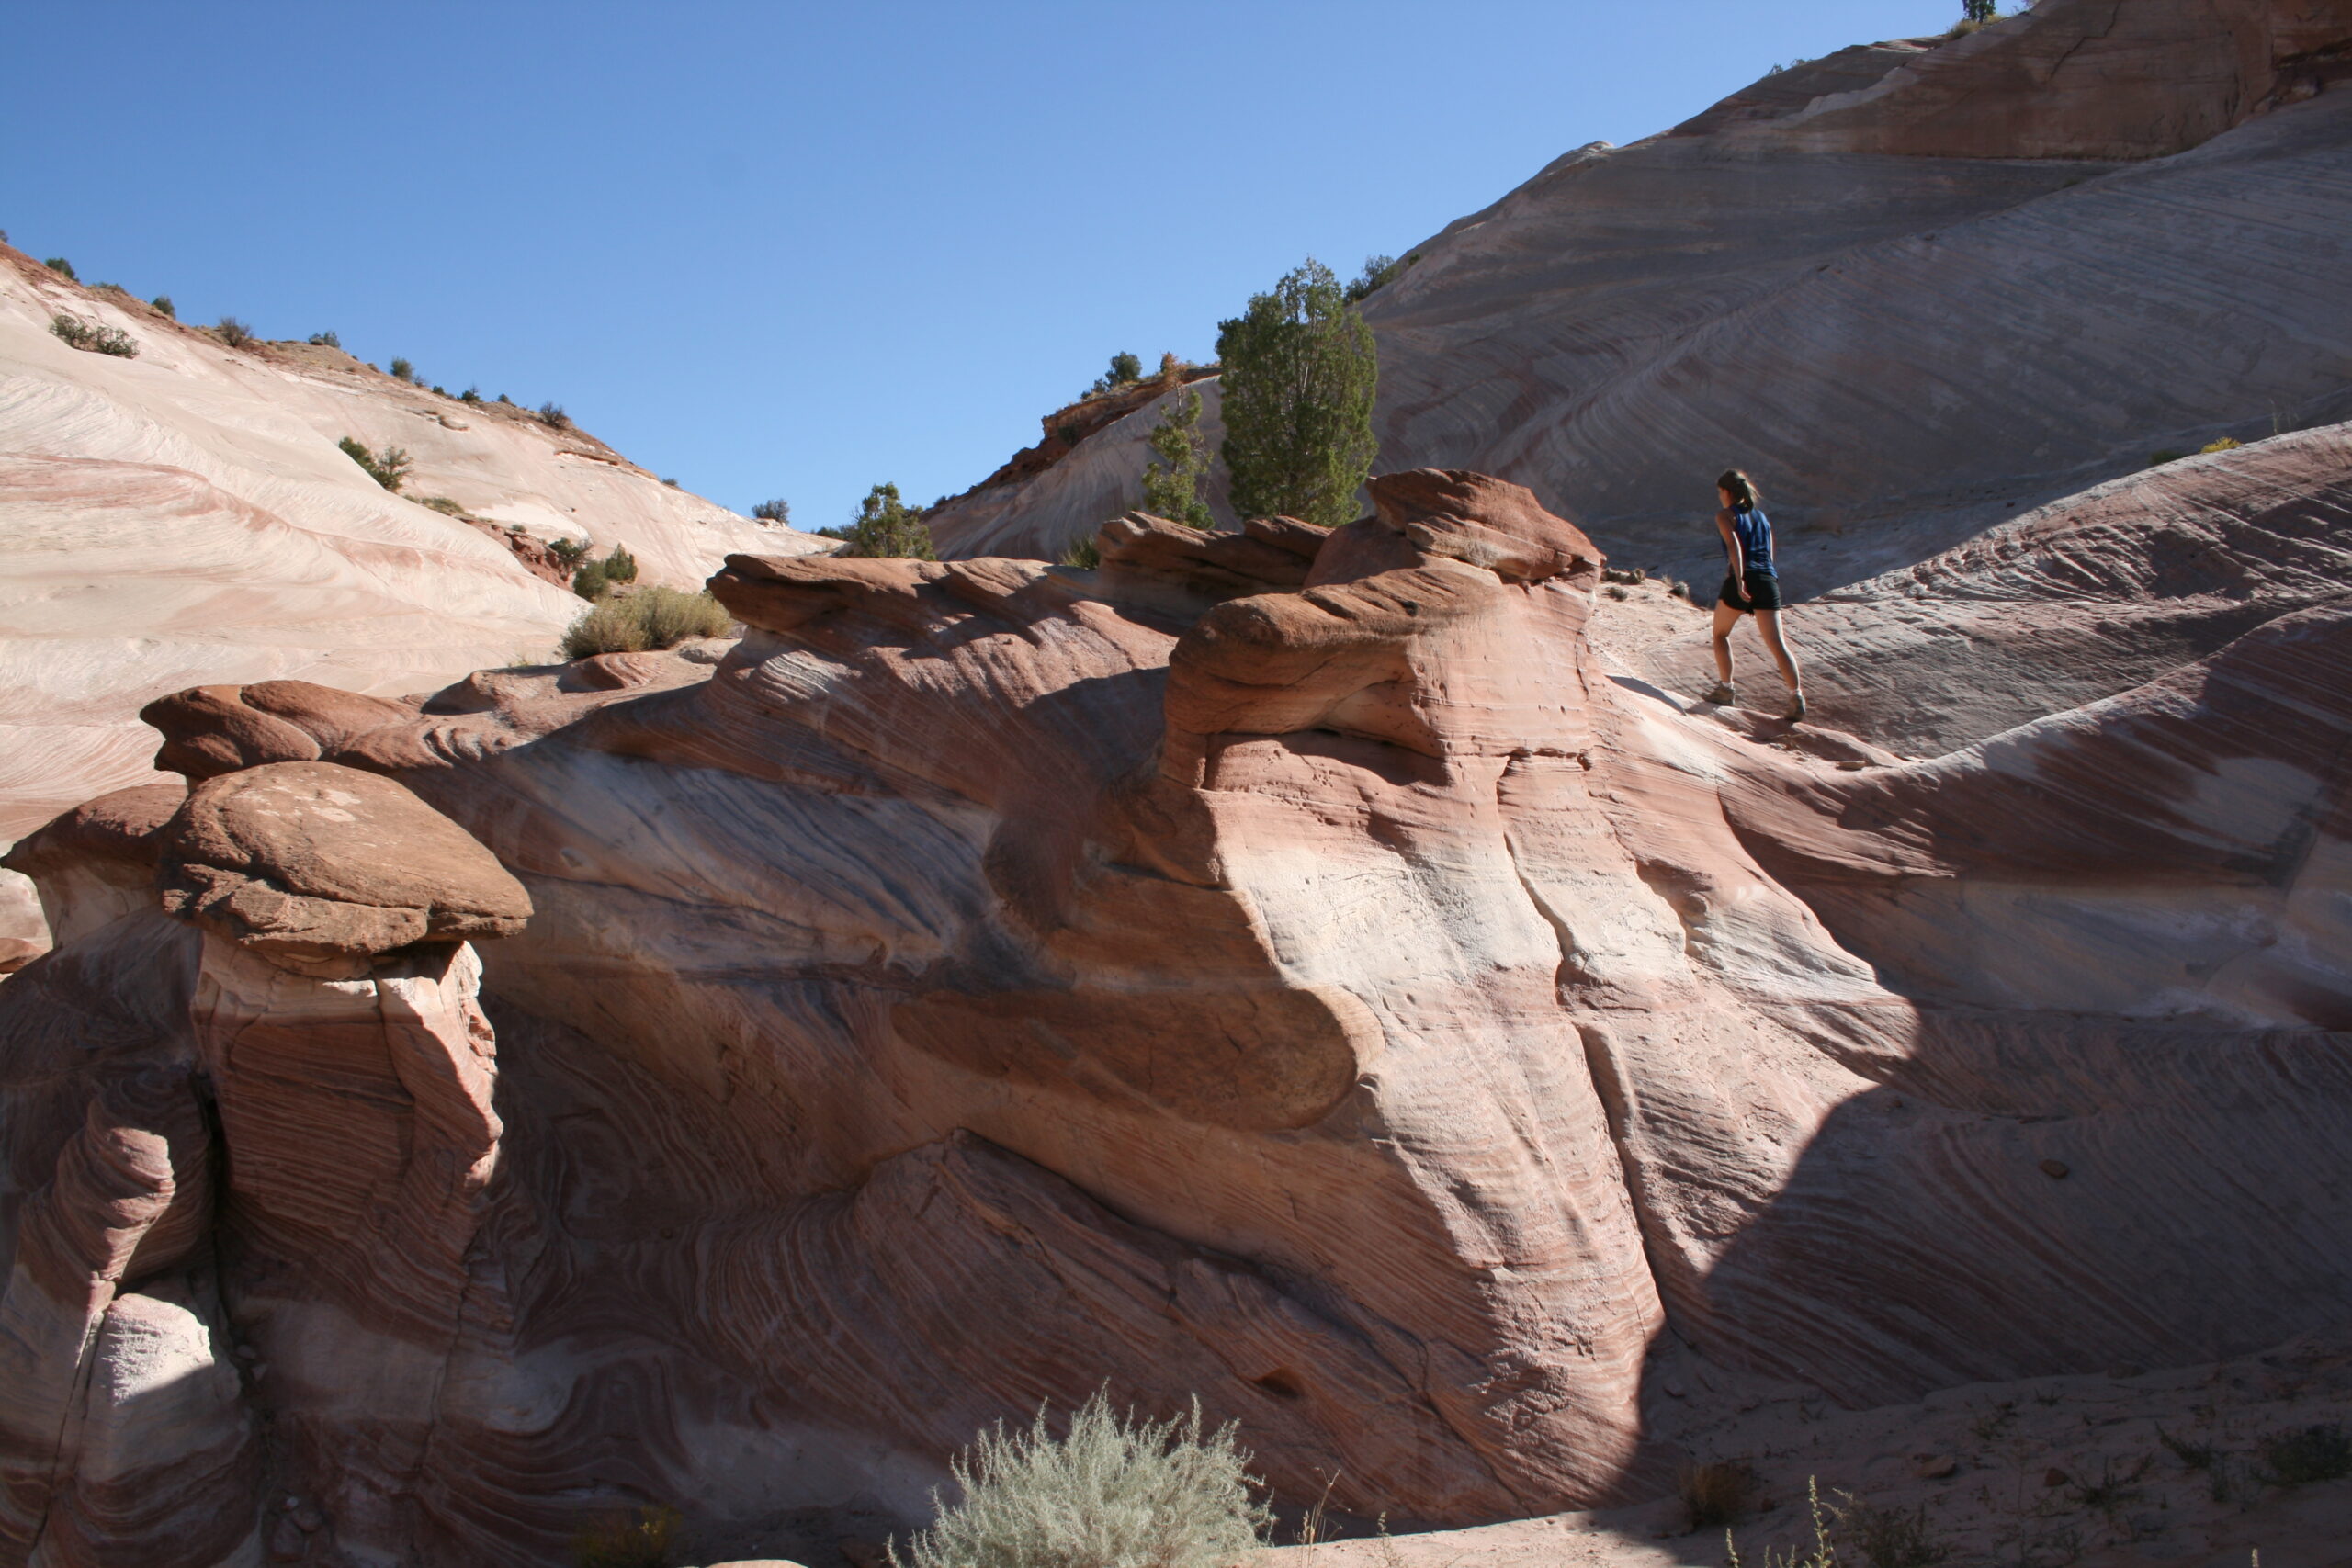 Wini hikes up rock formations near the White House Trailhead.